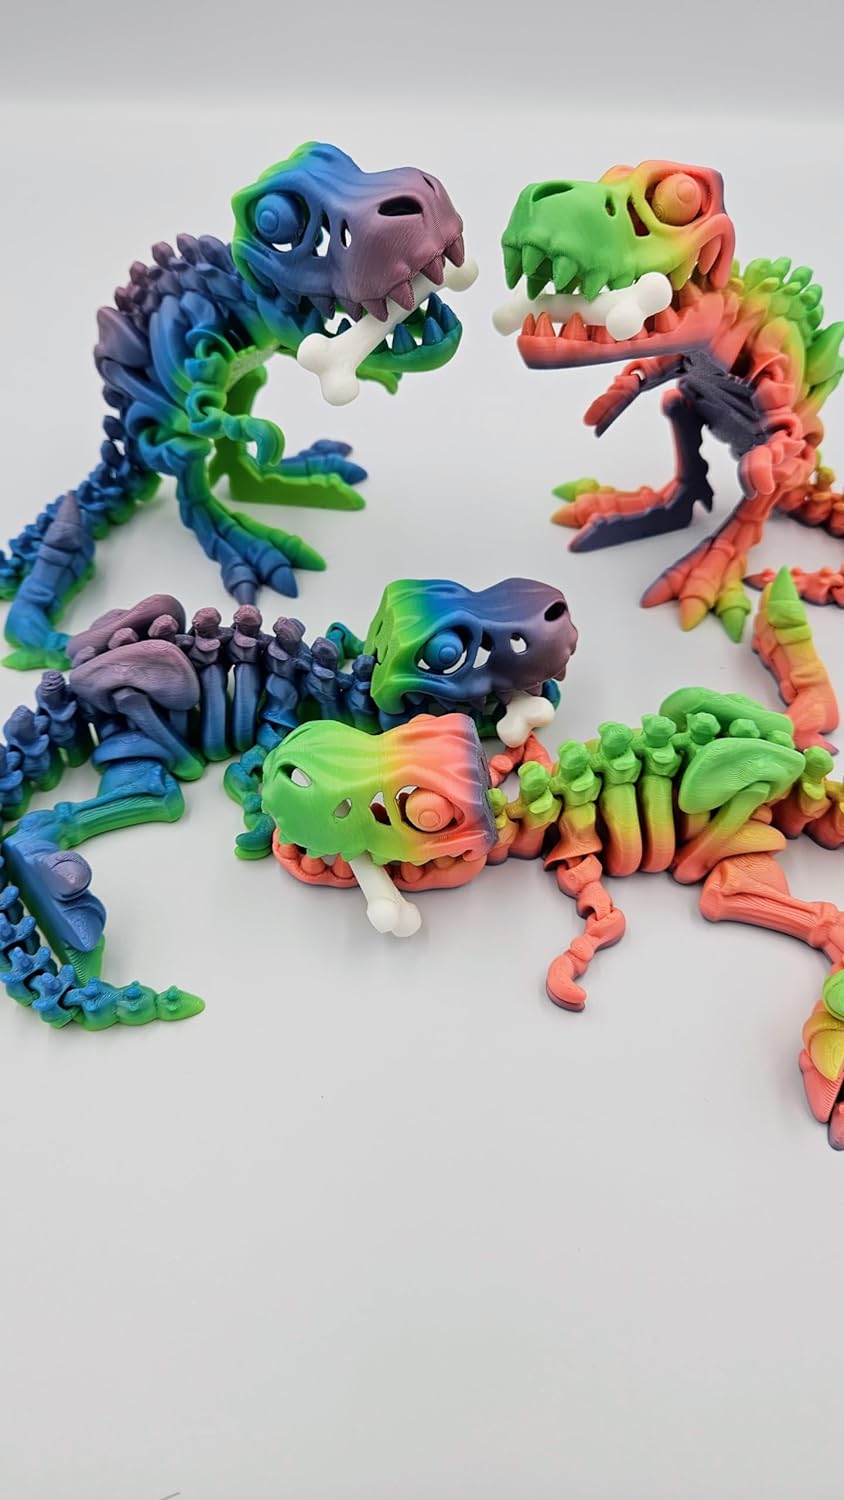 Flexible Rexi with Bone 3D Printed Articulated Toys for ADHD, Autism, Stress and Anxiety Relief